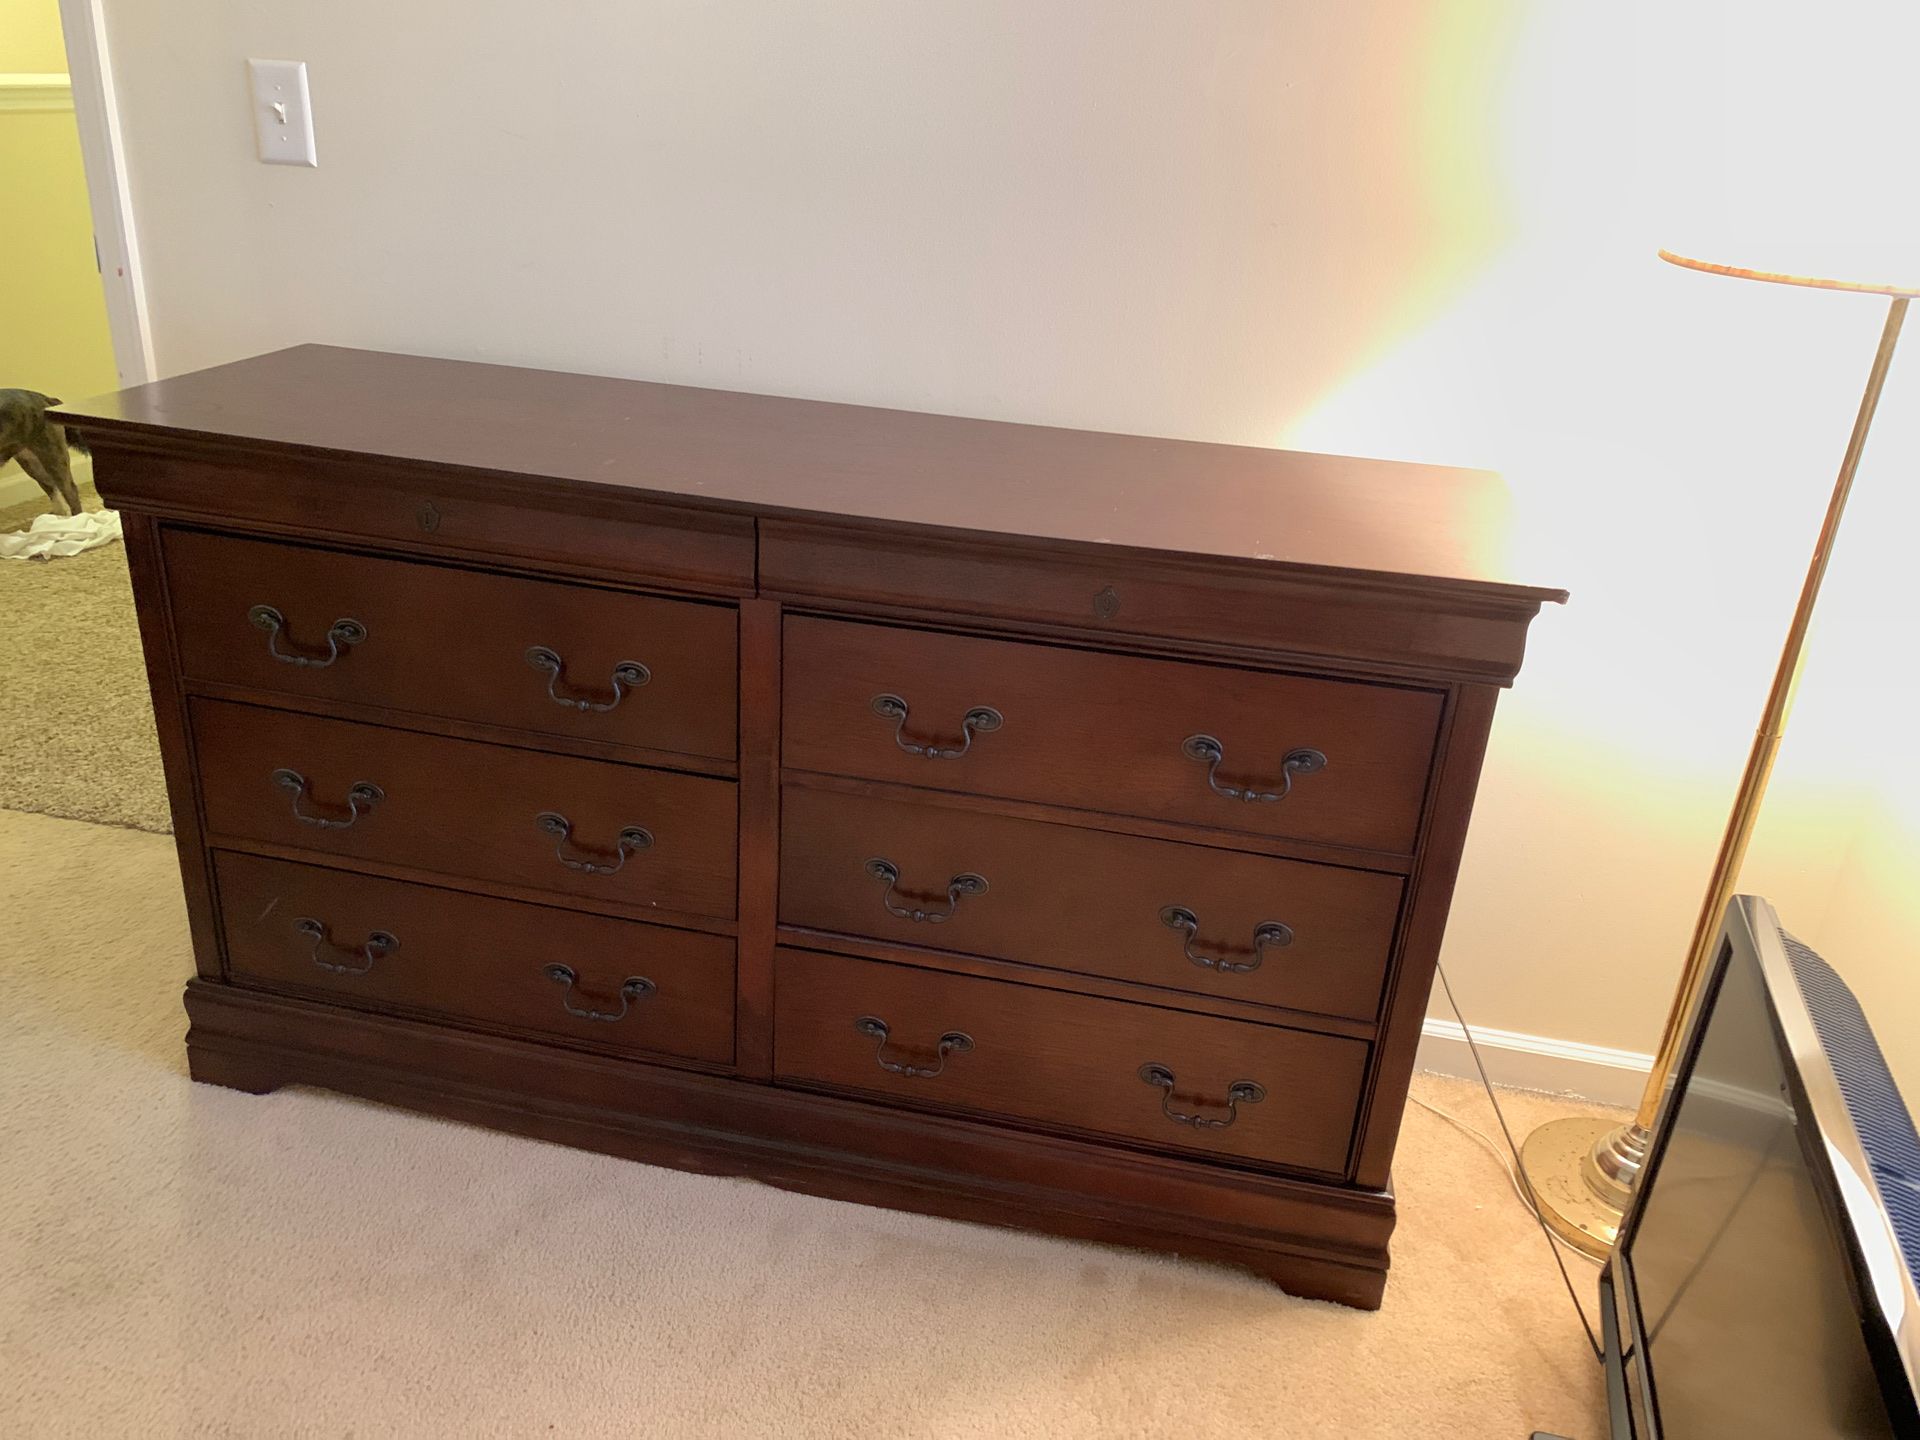 Nice dresser will need someone to help move asking 75.00